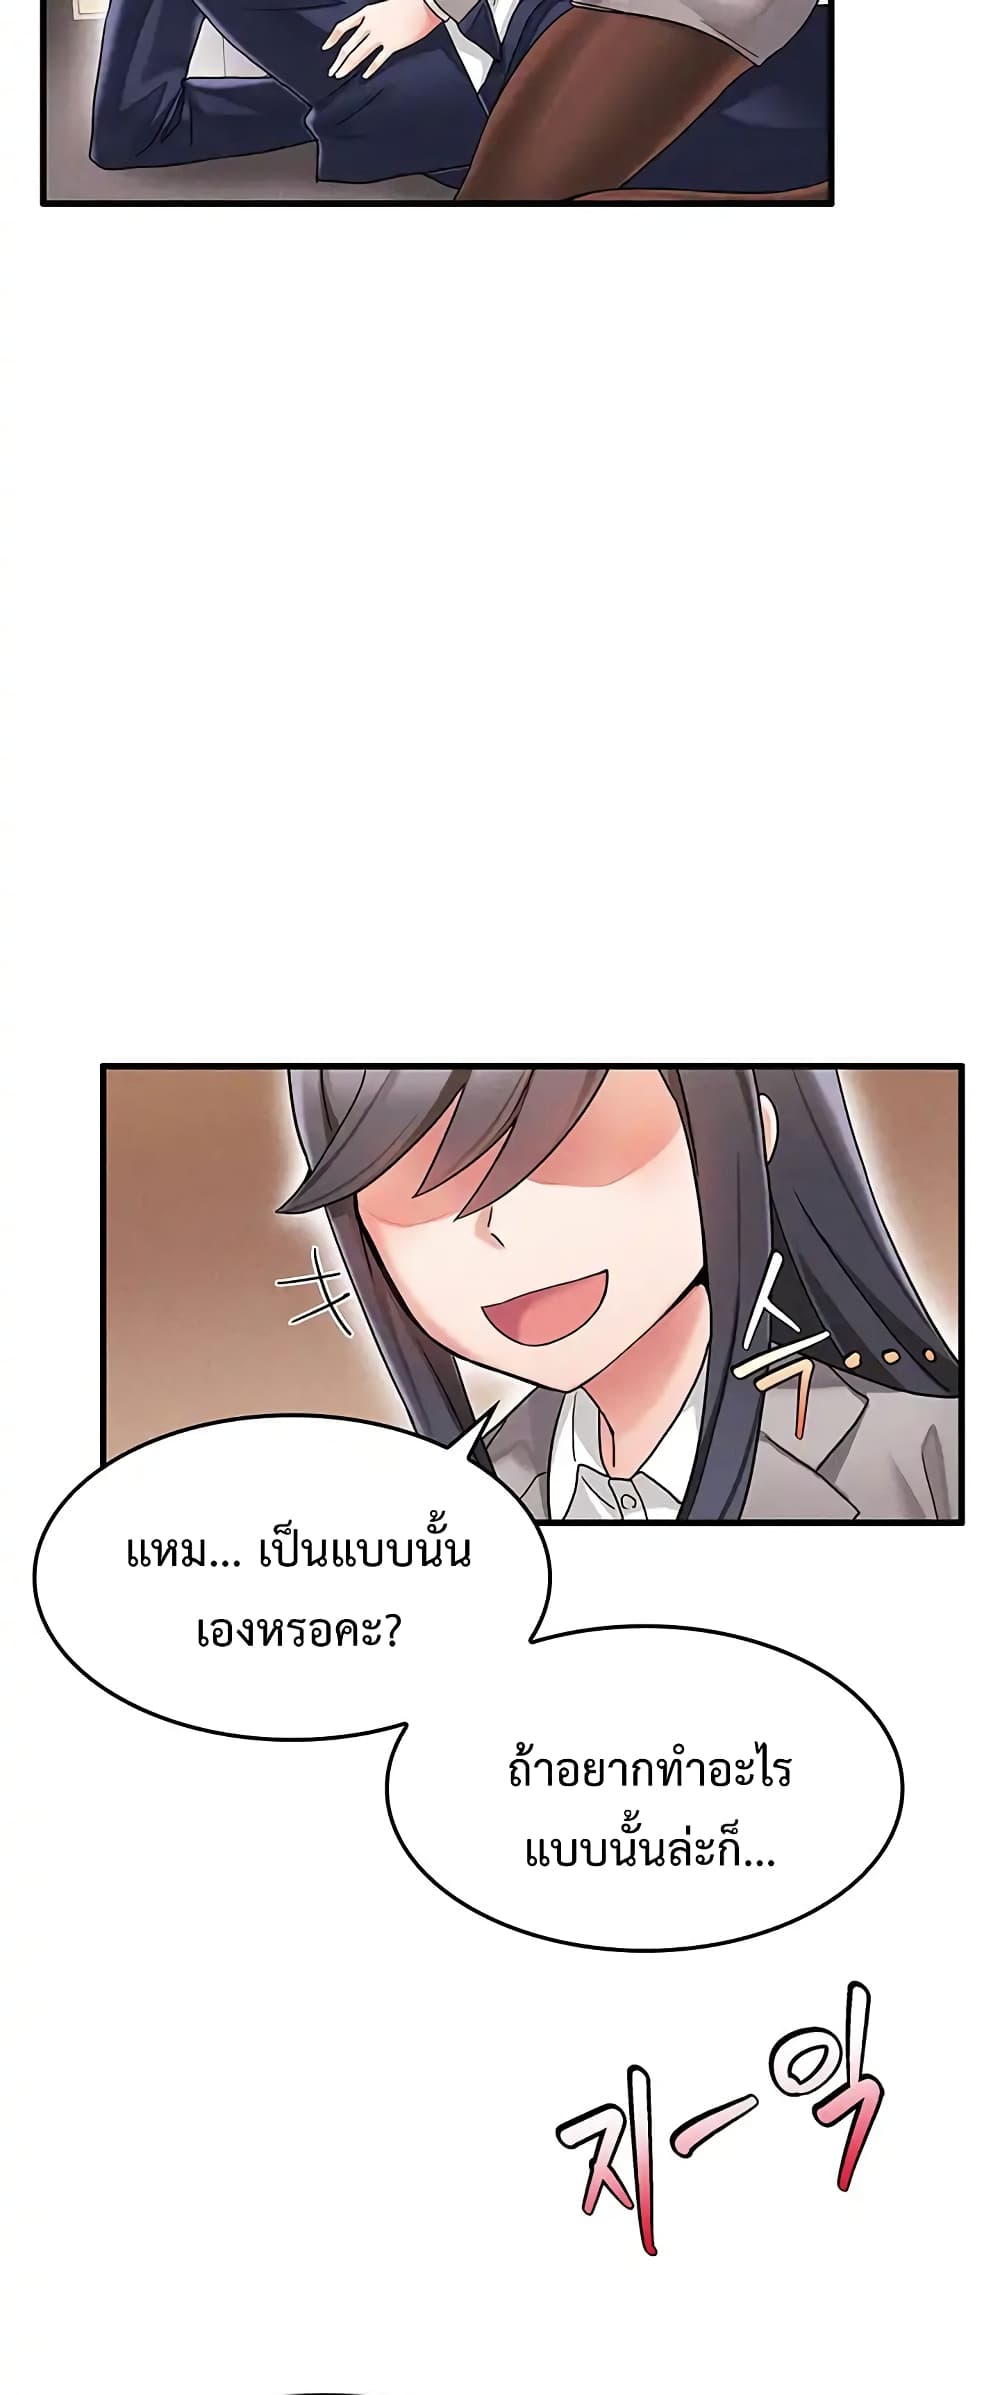 Relationship Reverse Button: Let’s Make Her Submissive 1 ภาพที่ 39